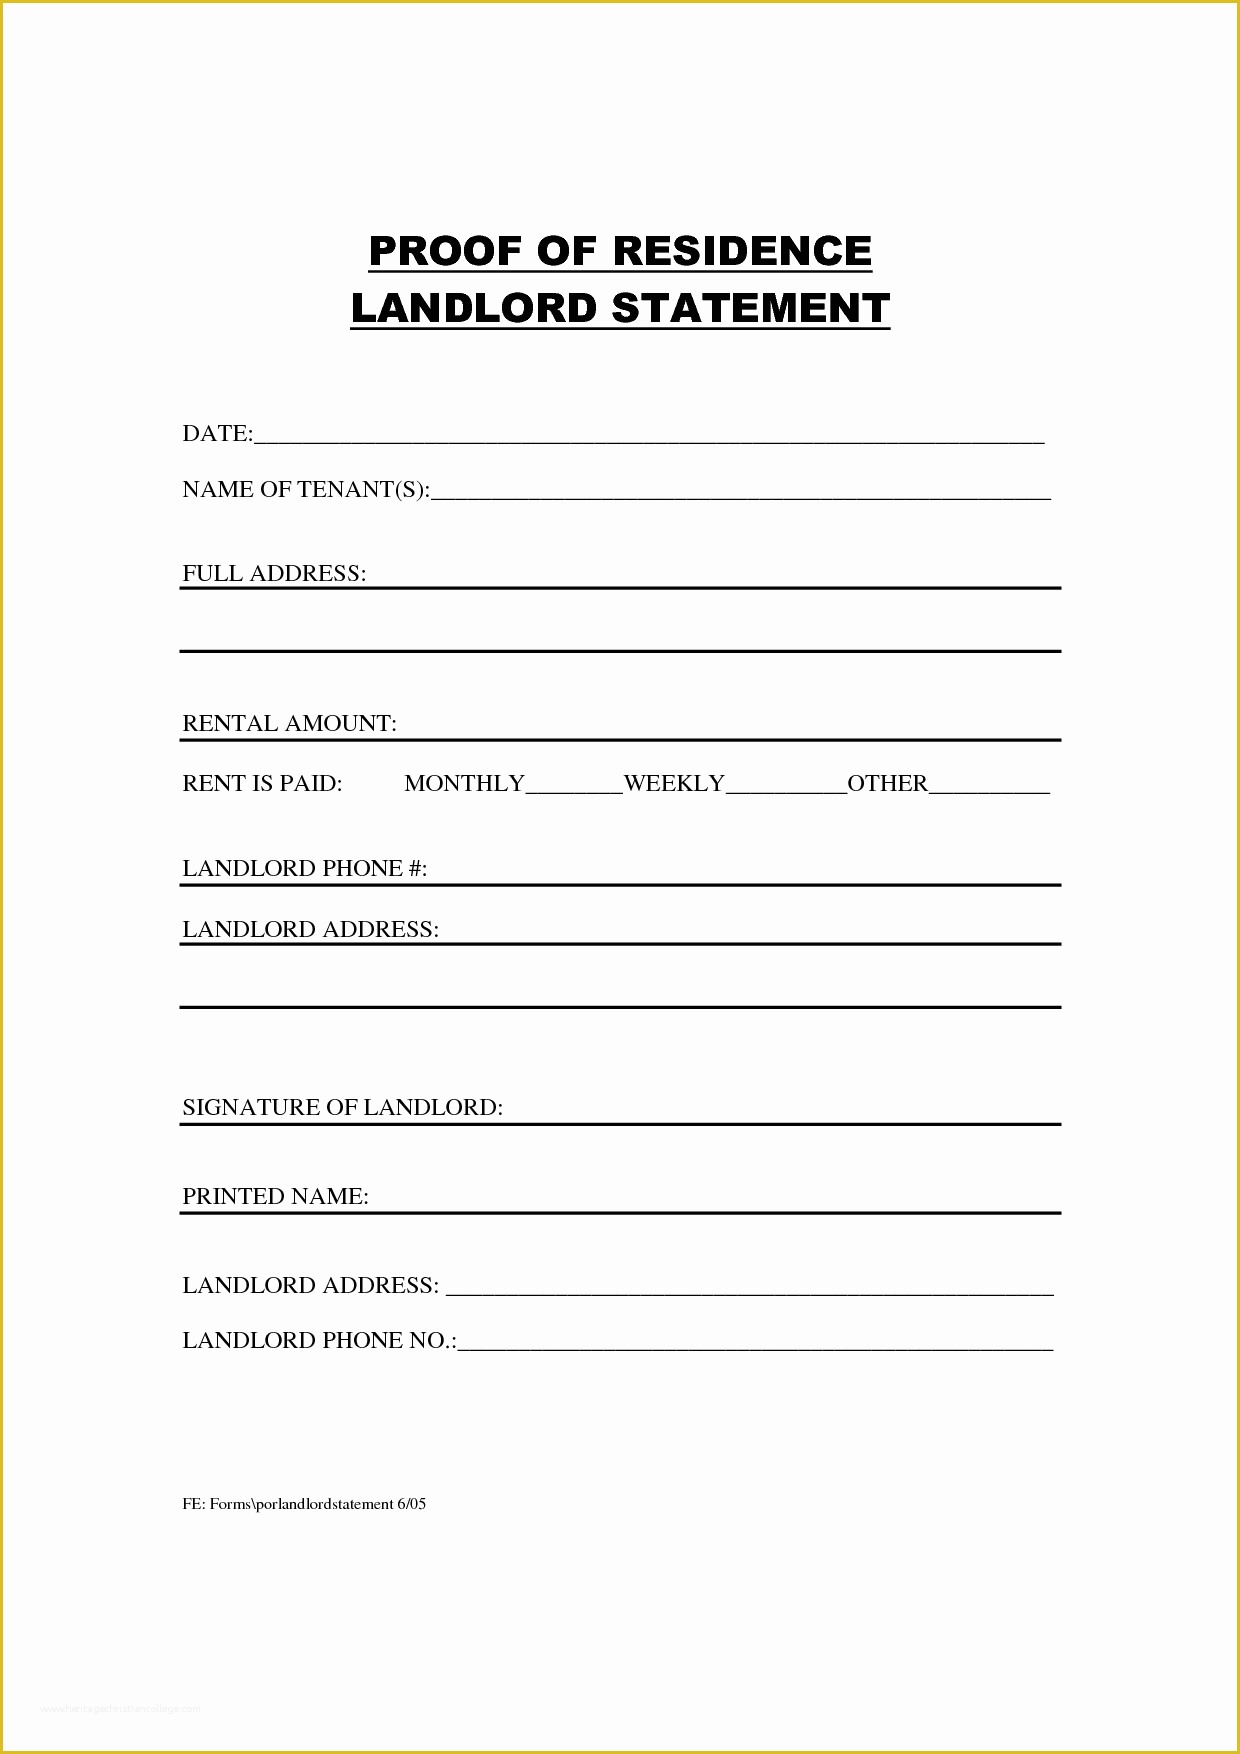 Free Landlord Templates Of Proof Of Residency Letter Google Search